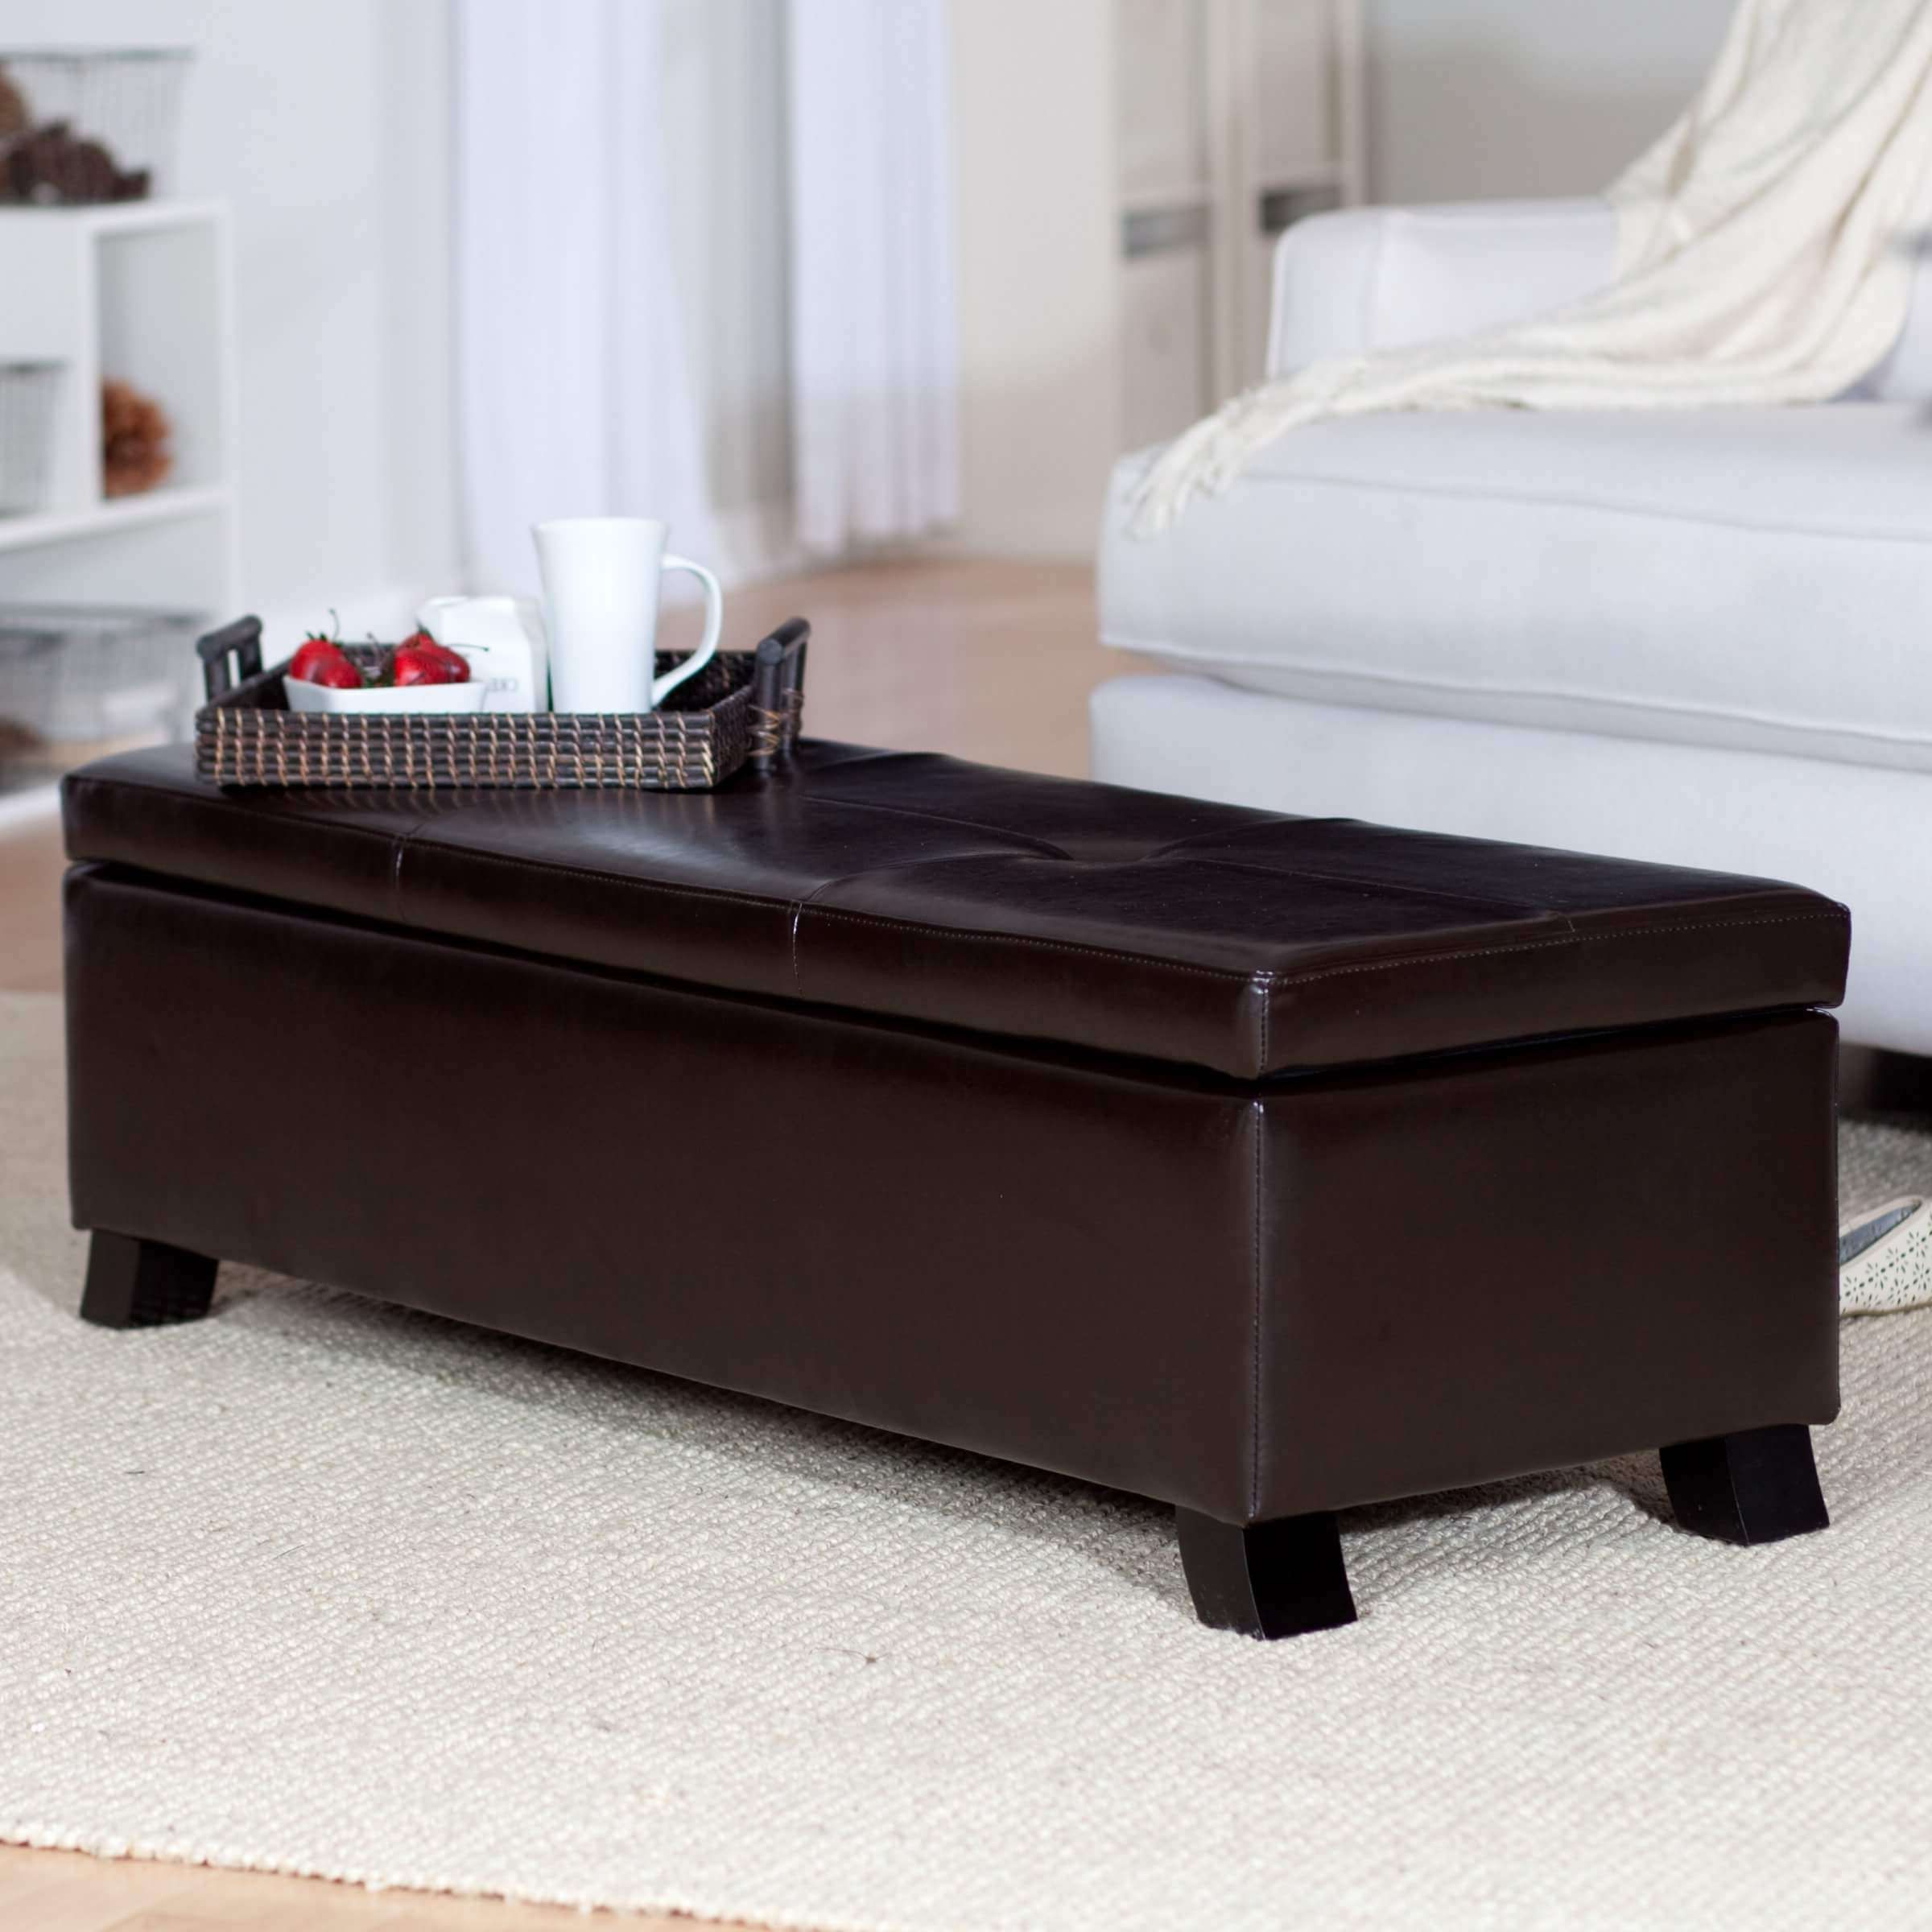 Well Known Brown Leather Ottoman Coffee Tables With Storages Throughout 36 Top Brown Leather Ottoman Coffee Tables (View 1 of 20)